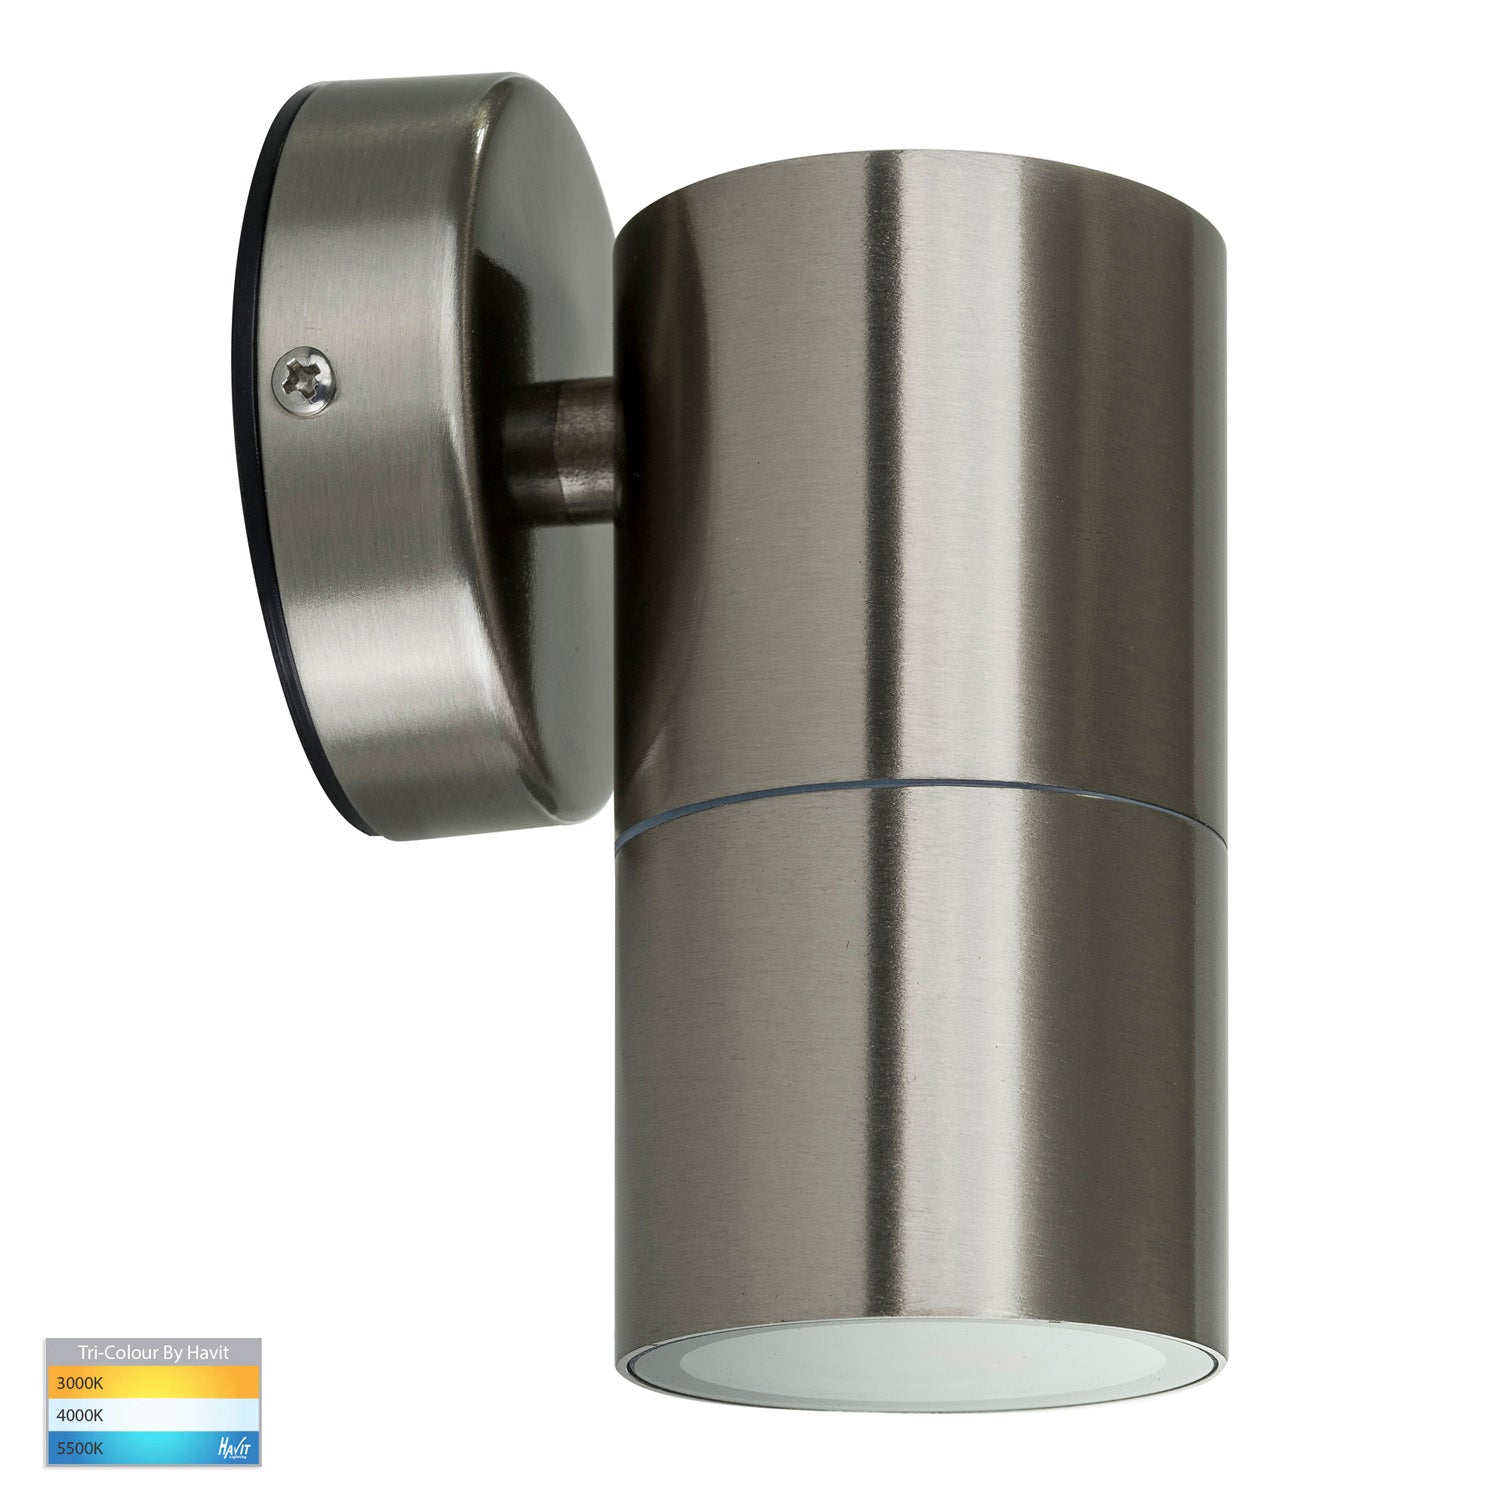 Stainless Steel Fixed Down Wall Light Fortis Havit Lighting - HV1172T - Mases LightingHavit Lighting